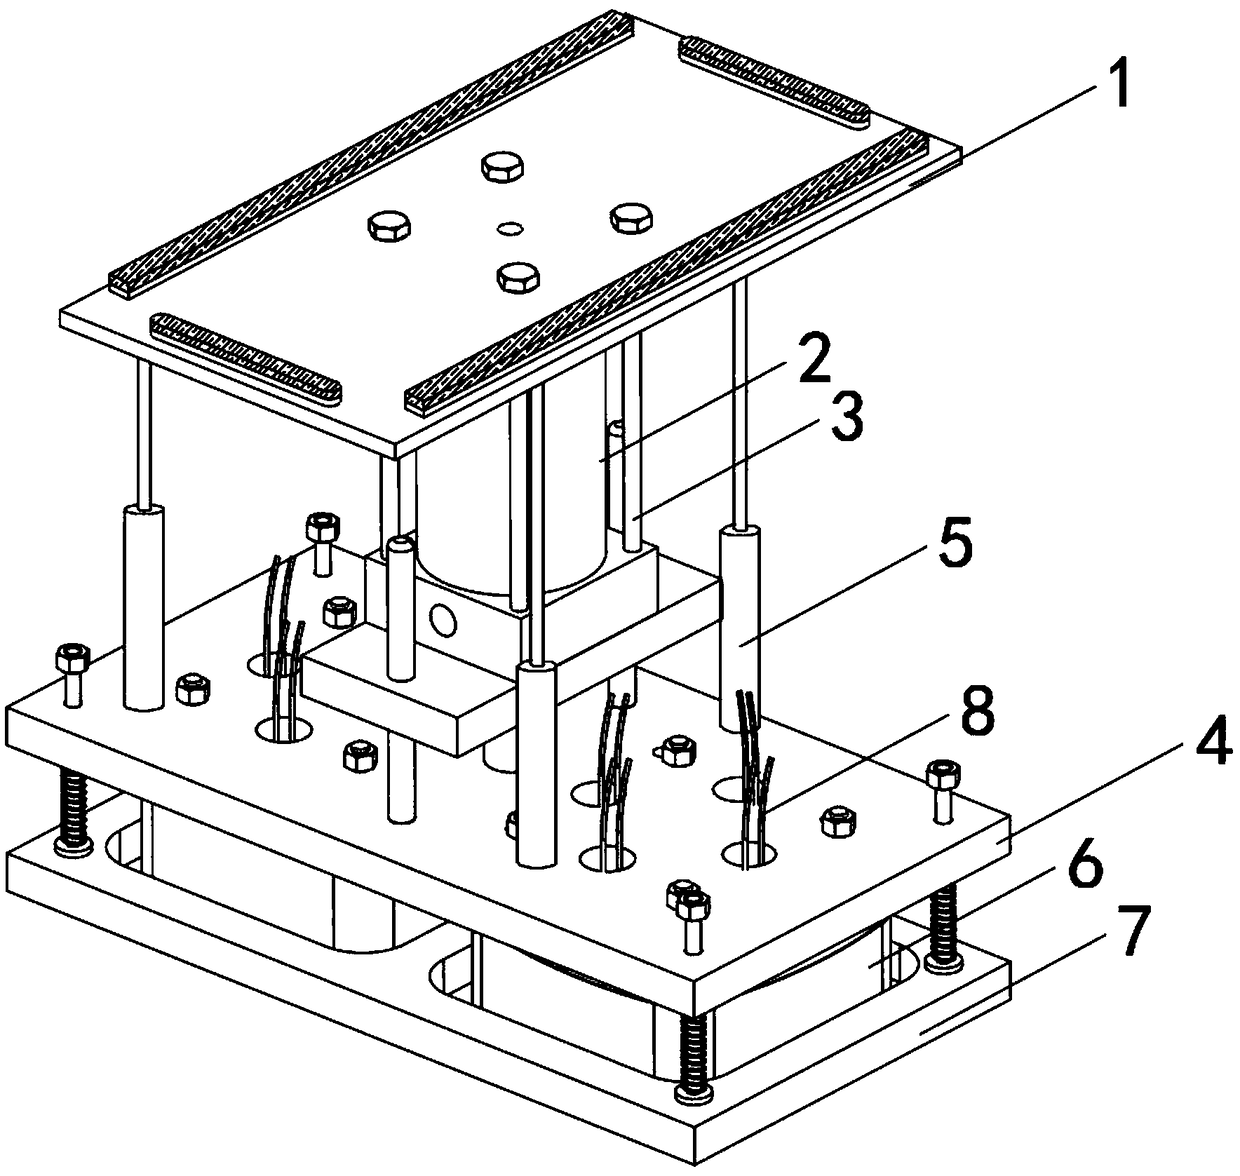 A power transmission base for a solar panel photovoltaic energy storage system